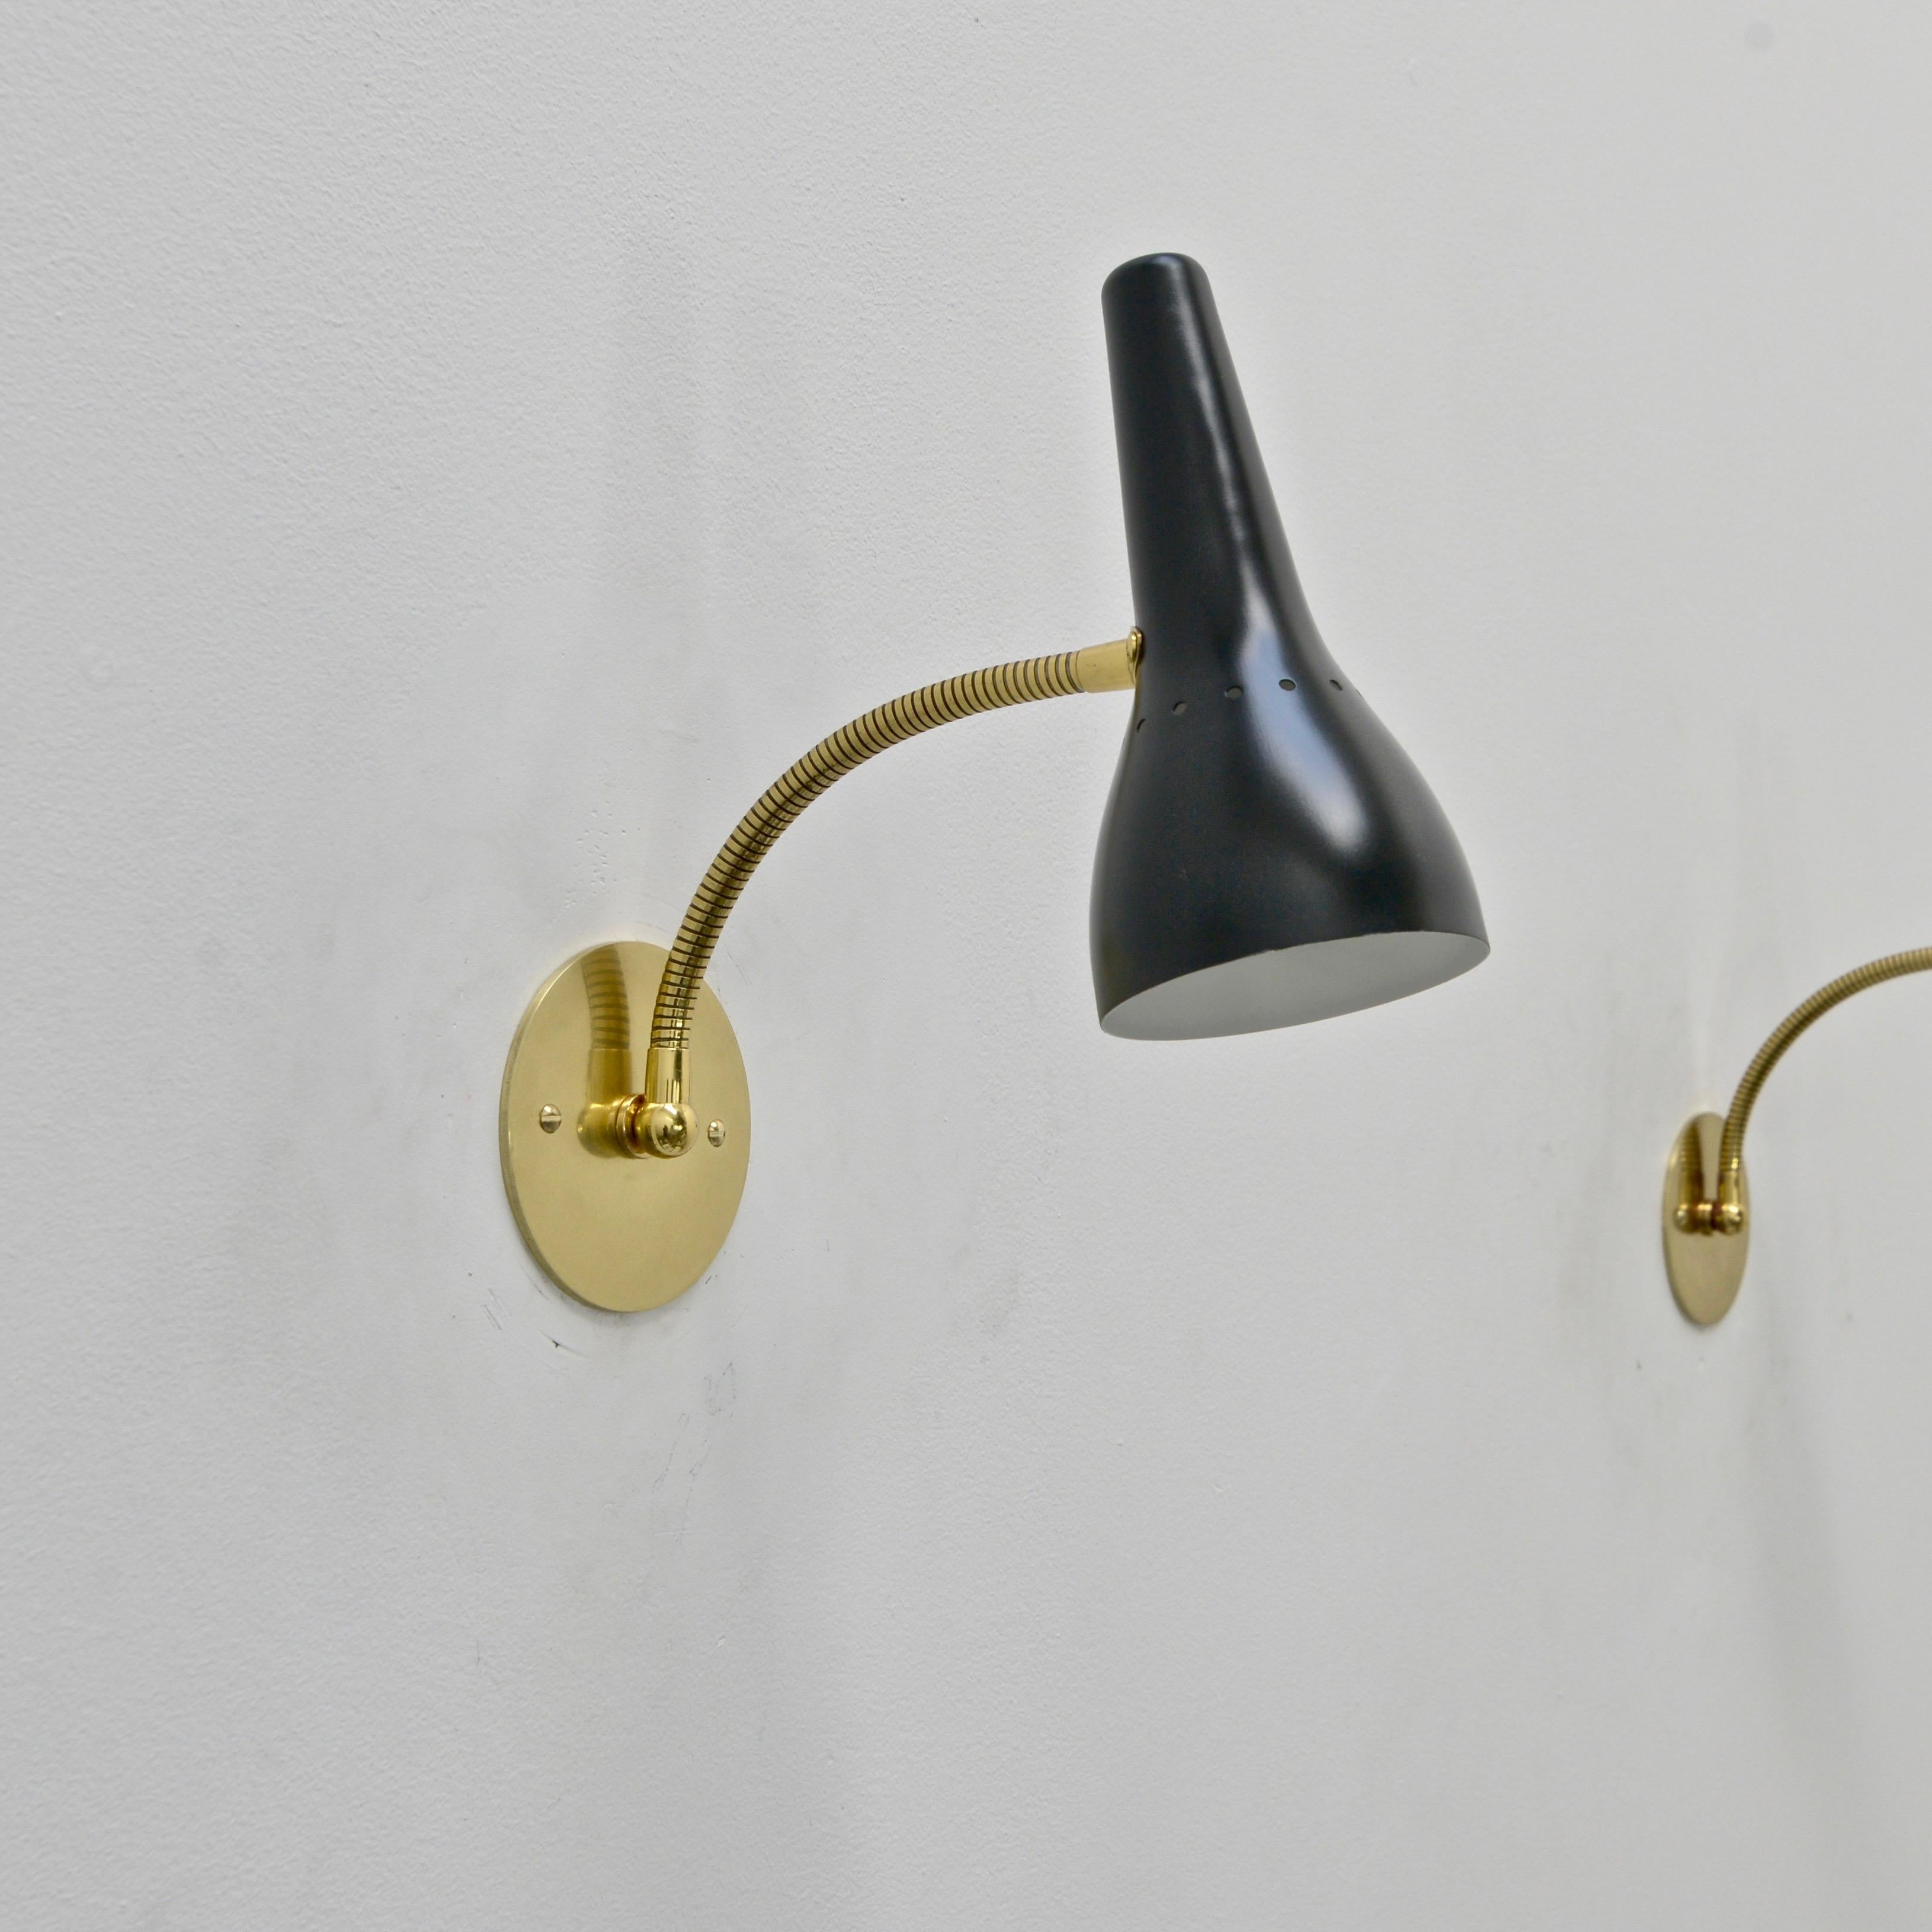 Pair of vintage German gooseneck reading sconces from the 1950s partially restored in painted aluminum and brass. Single E12 candelabra based socket per sconce. Priced as a pair. Wired for use in the US. Lightbulbs included with